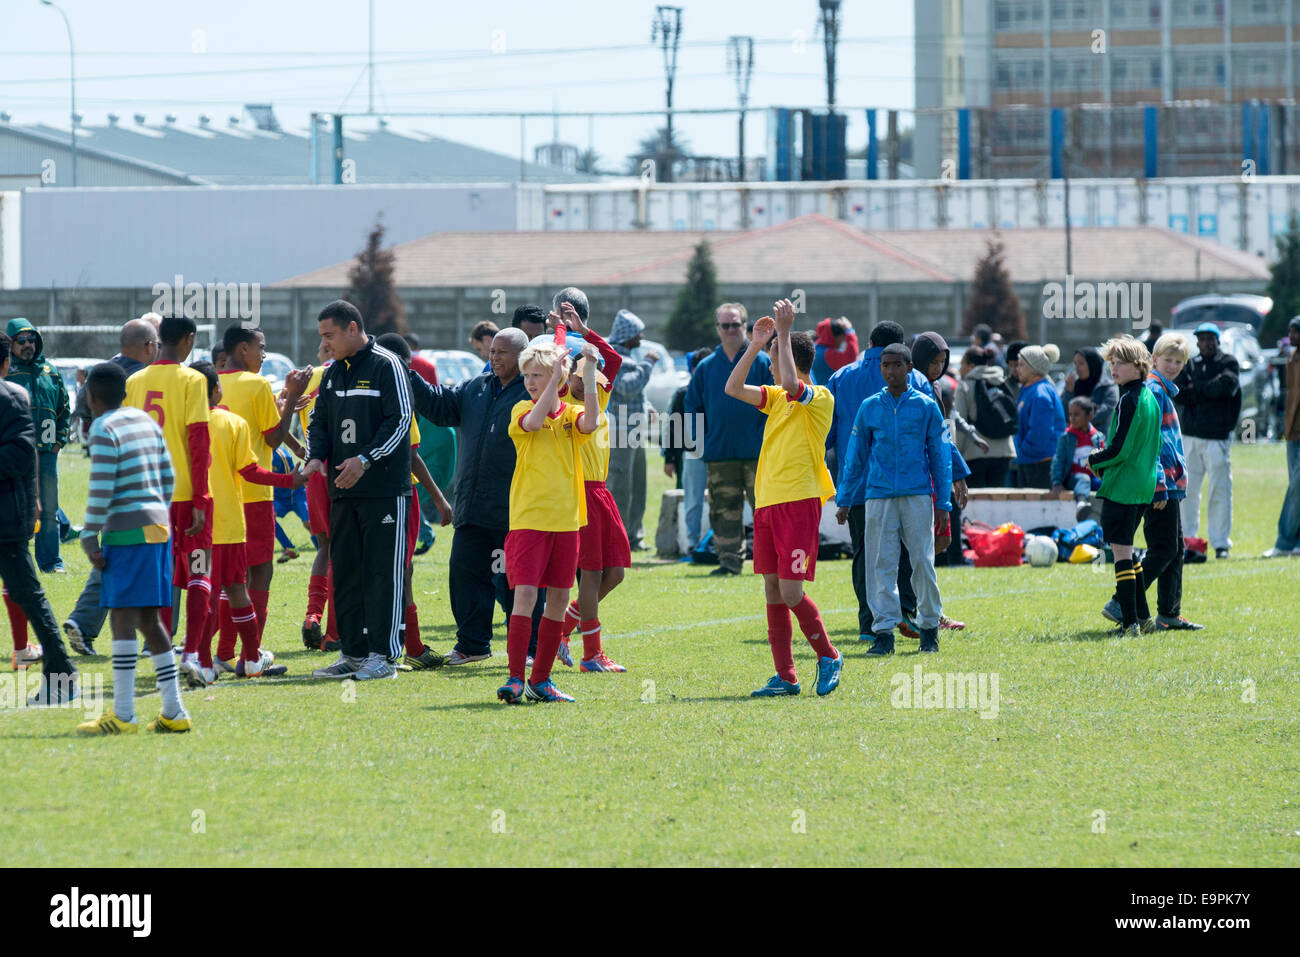 Junior football players applauding to fans after the match, Cape Town, South Africa Stock Photo